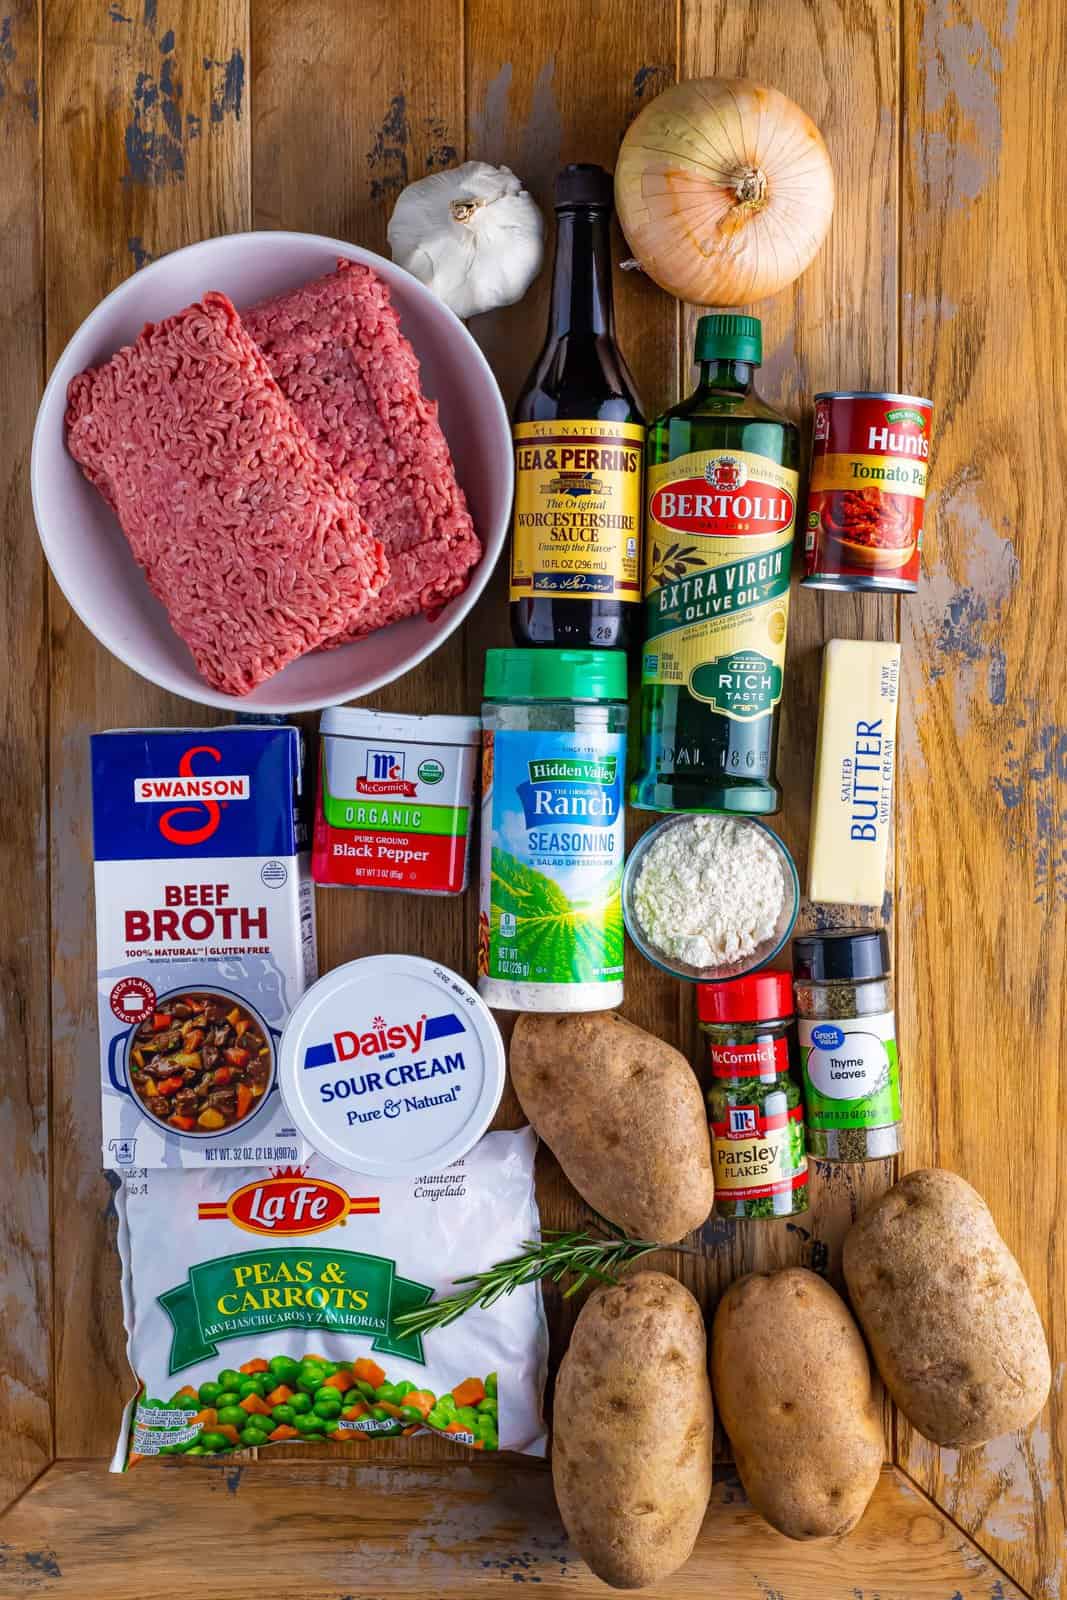 olive oil, onion, parsley, rosemary, thyme, pepper, ground geef or lamb, garlic, worcestershire sauce, flour, tomato paste, frozen peas and carrots, beef broth, potatoes, sour cream, butter, ranch seasoning.